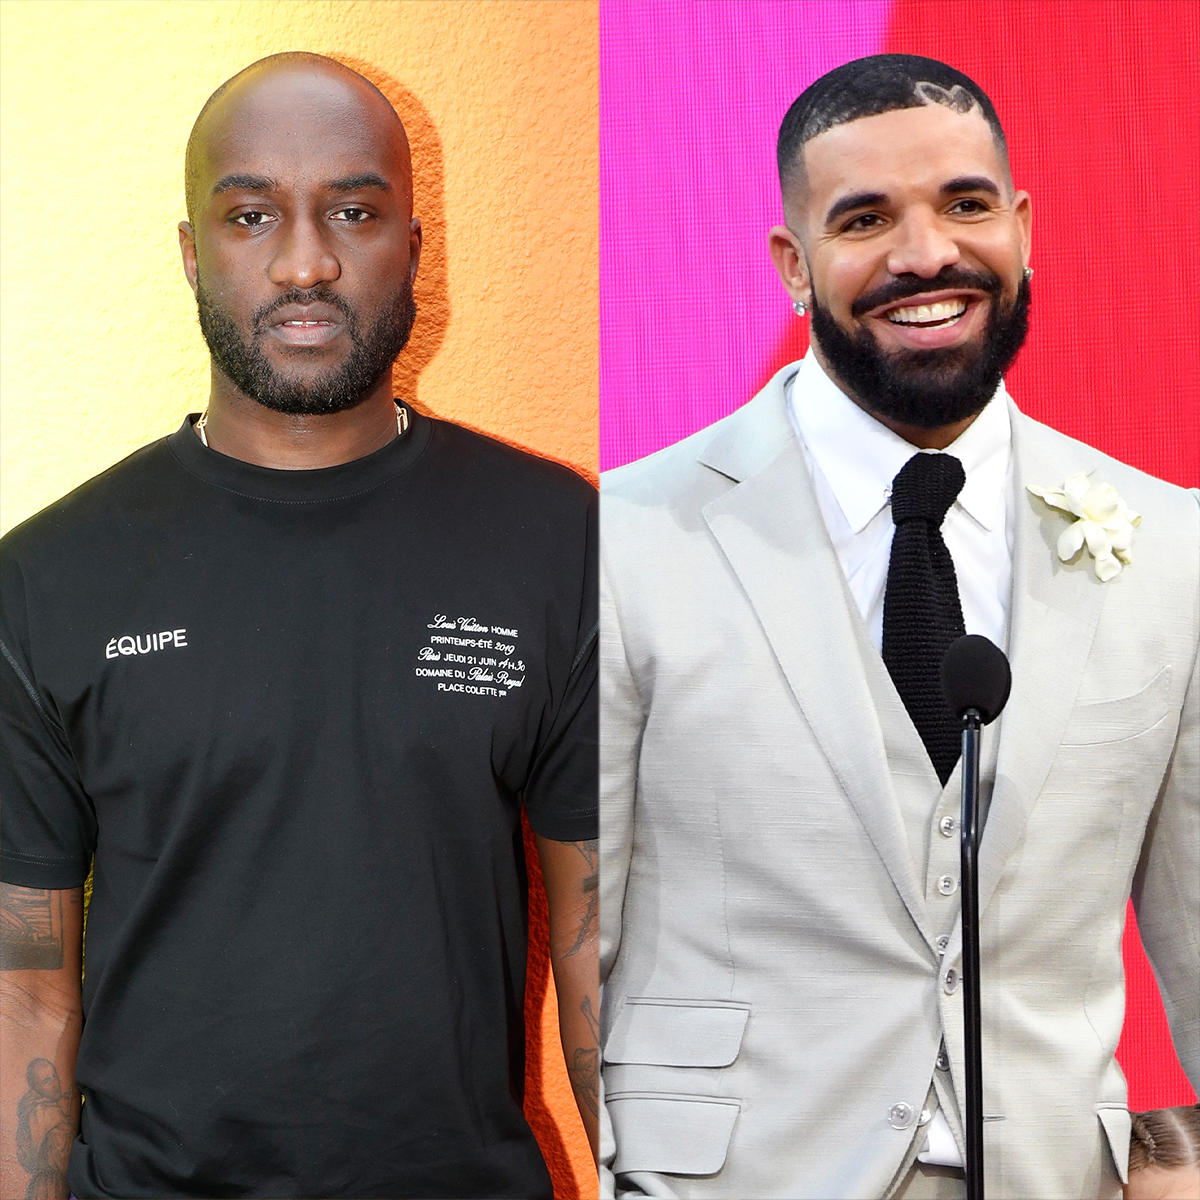 Drake Unveils A Massive Statue Honoring Late Fashion Designer Virgil Abloh  During His Tour: Let's Pay Some Respect